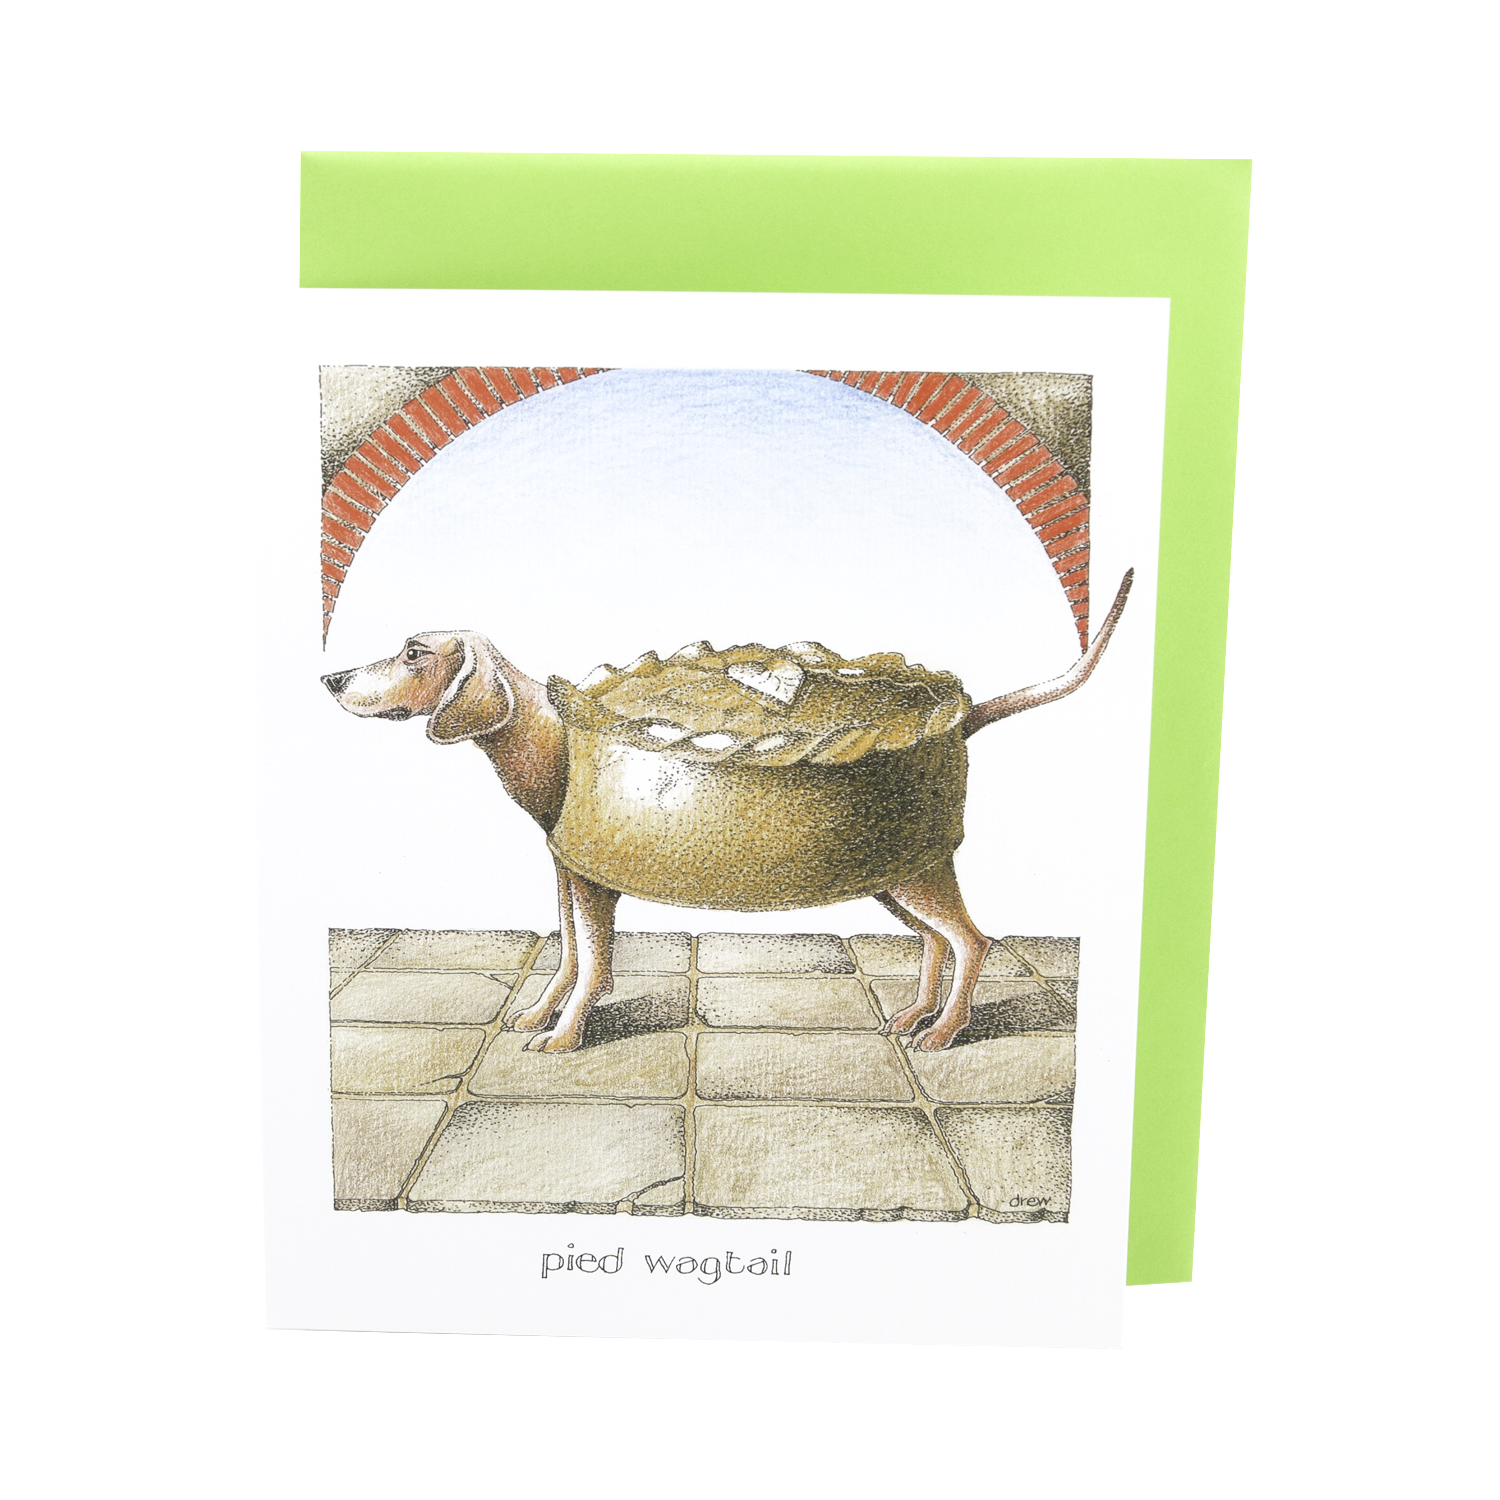 DogKrazy.Gifts – Simon Drew Pied Wagtail Humorous card featuring a dog so full of treats it’s turned into a pie. Part of the Simon Drew Dog Collection available from Dog Krazy Gifts